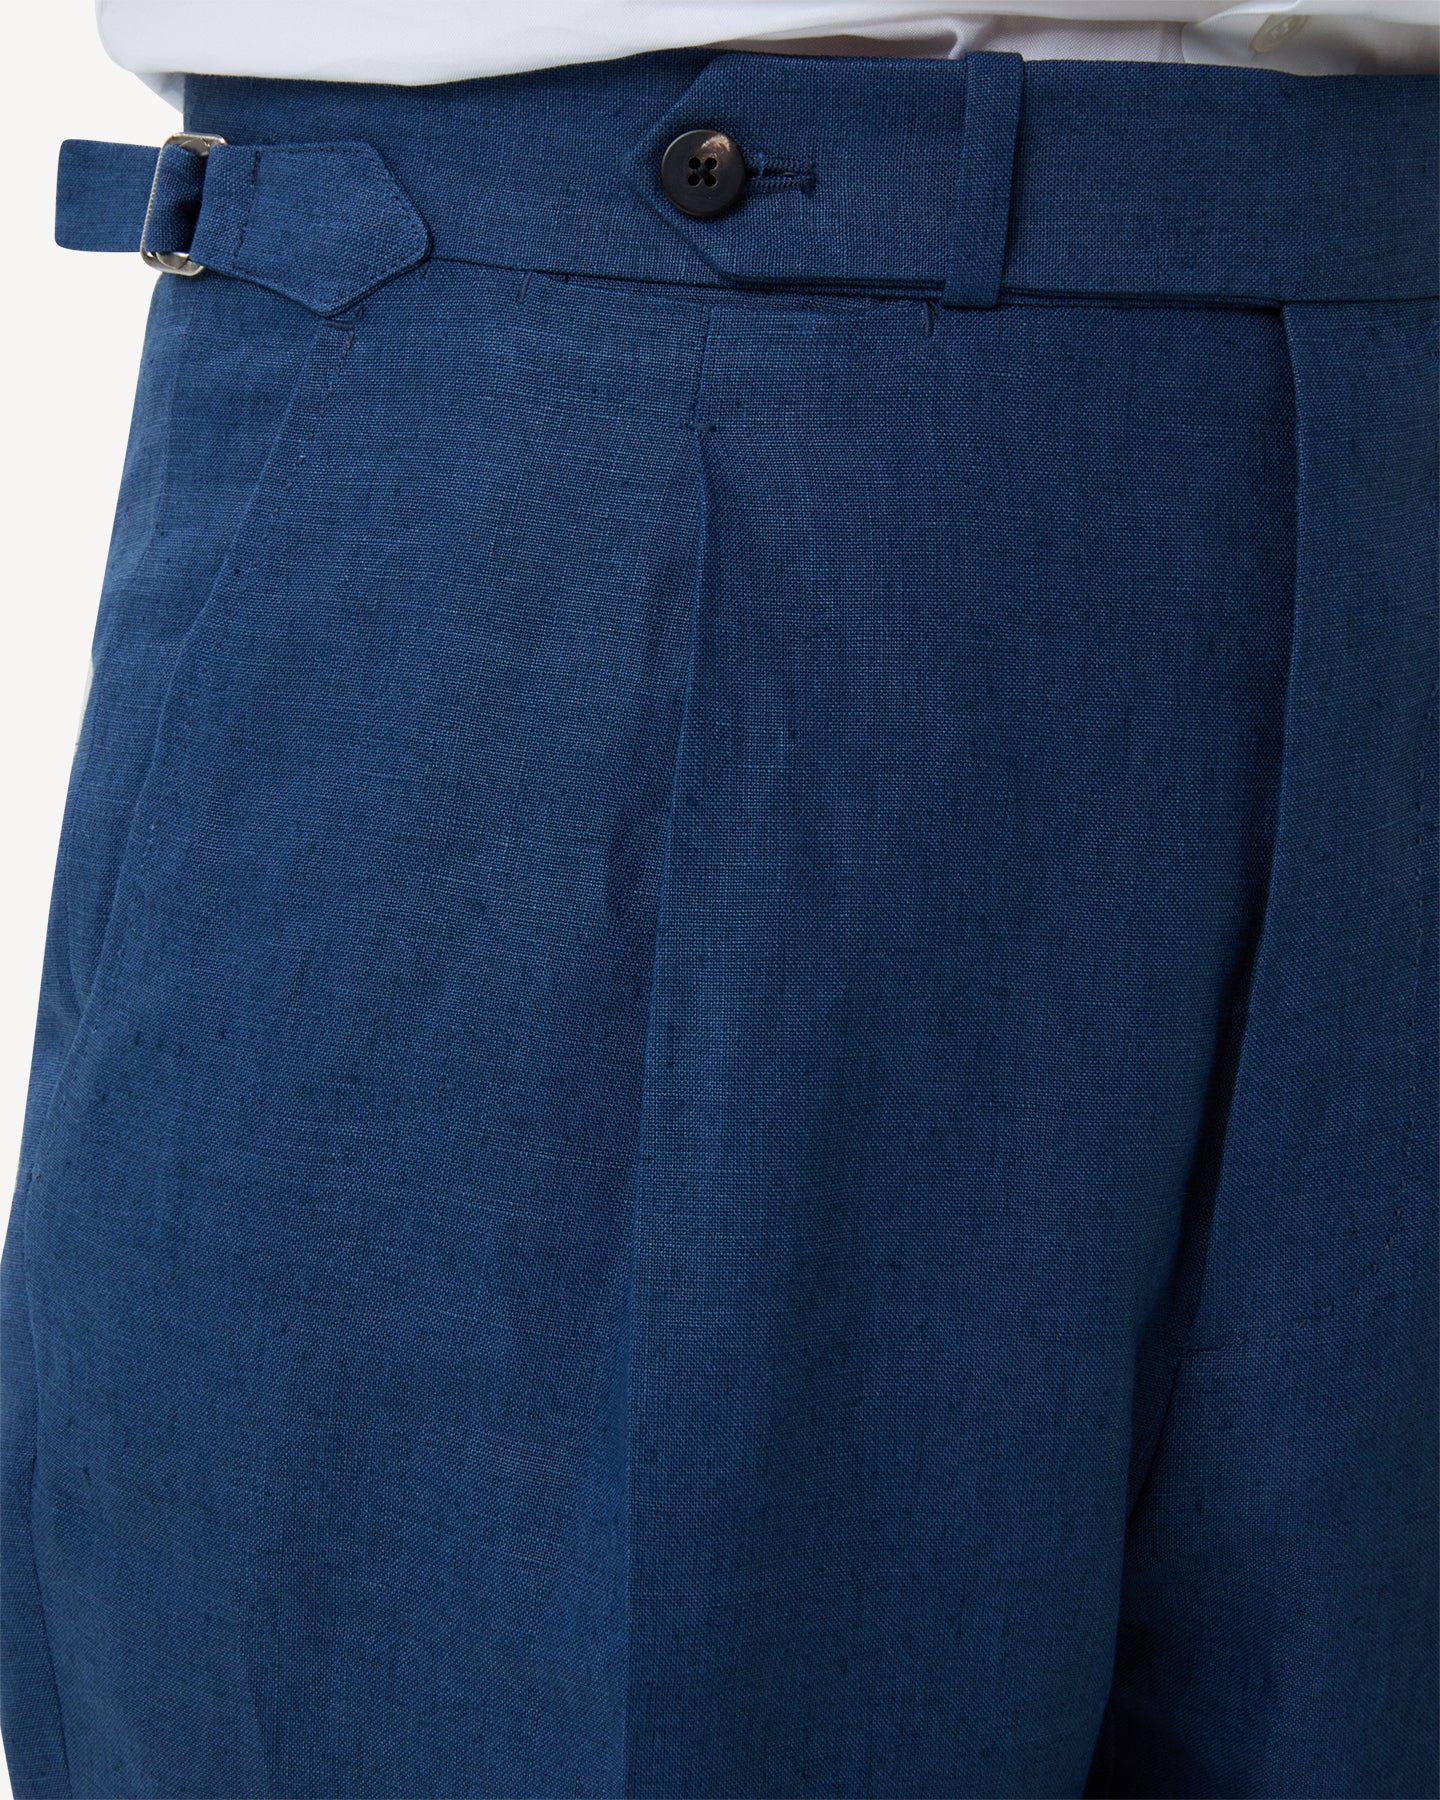 Blueberry linen trousers with extended waistband